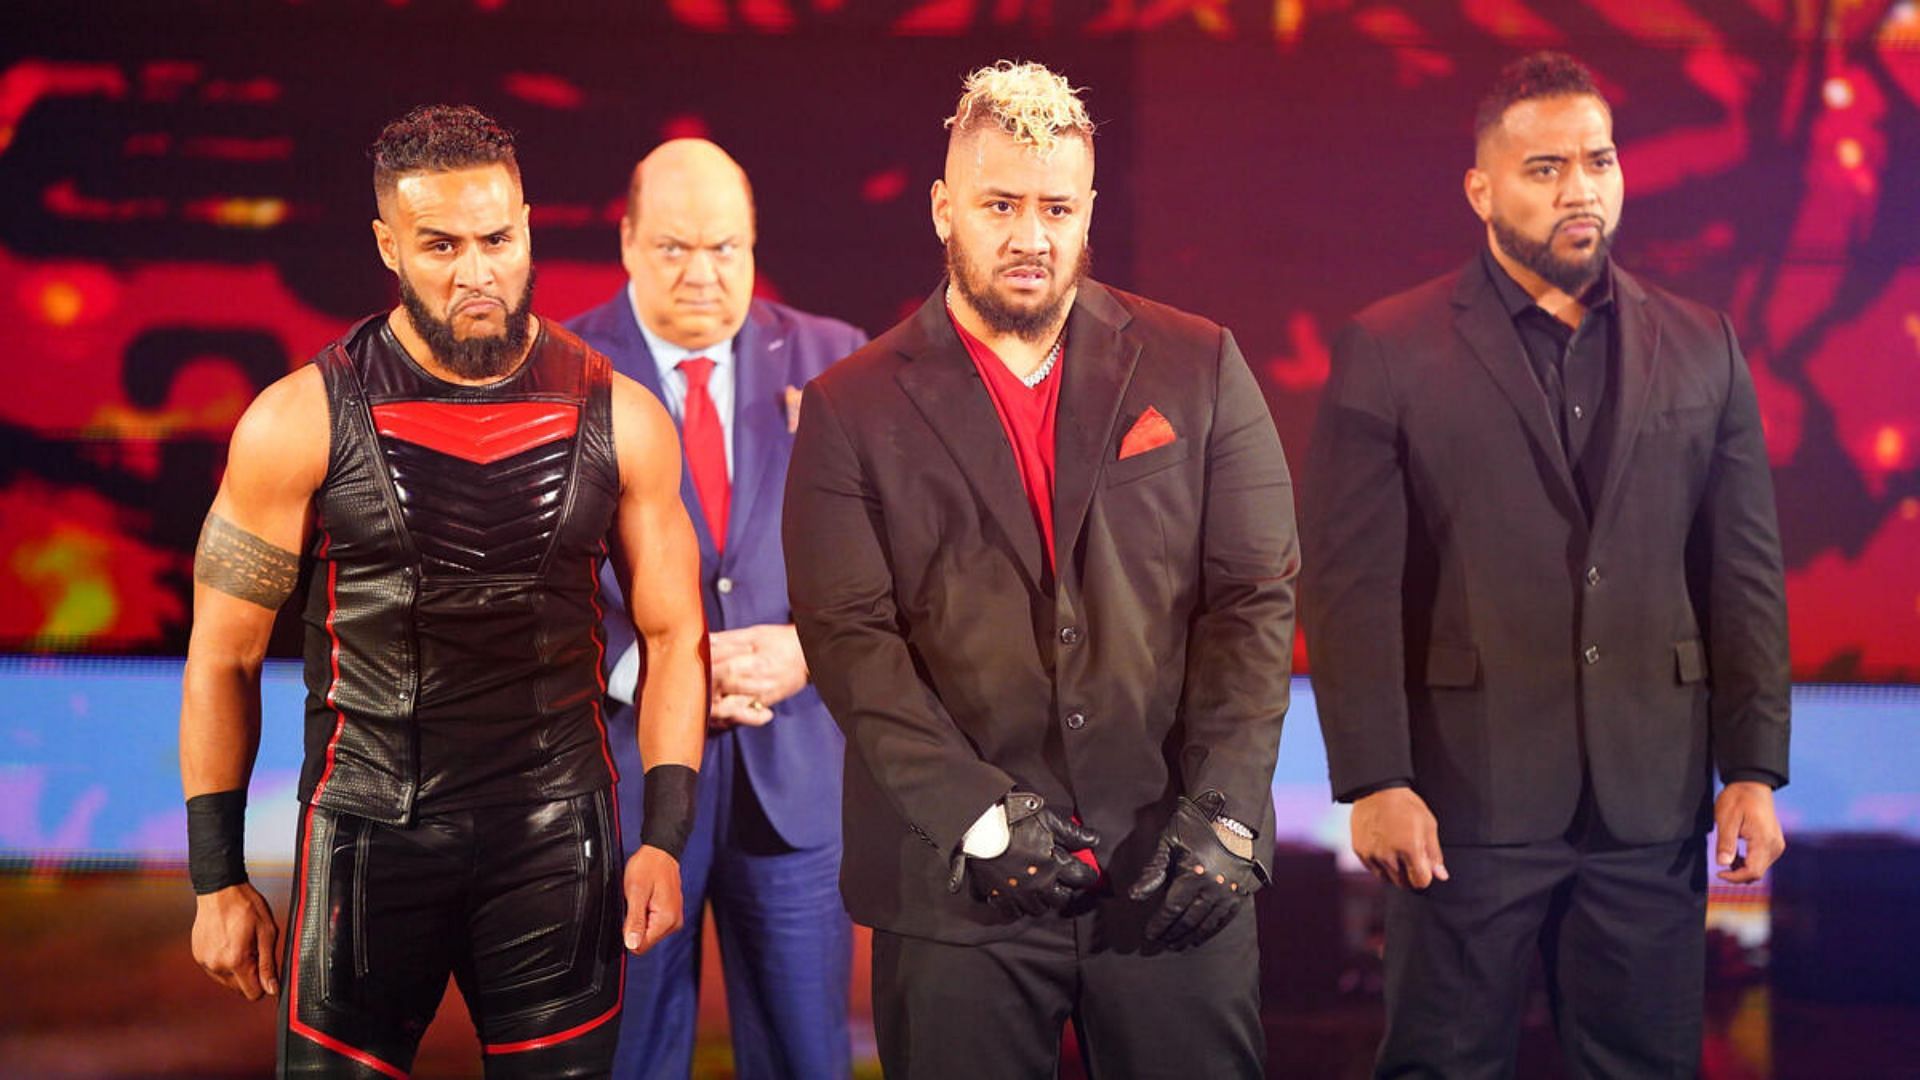 What is next for the Bloodline in WWE?